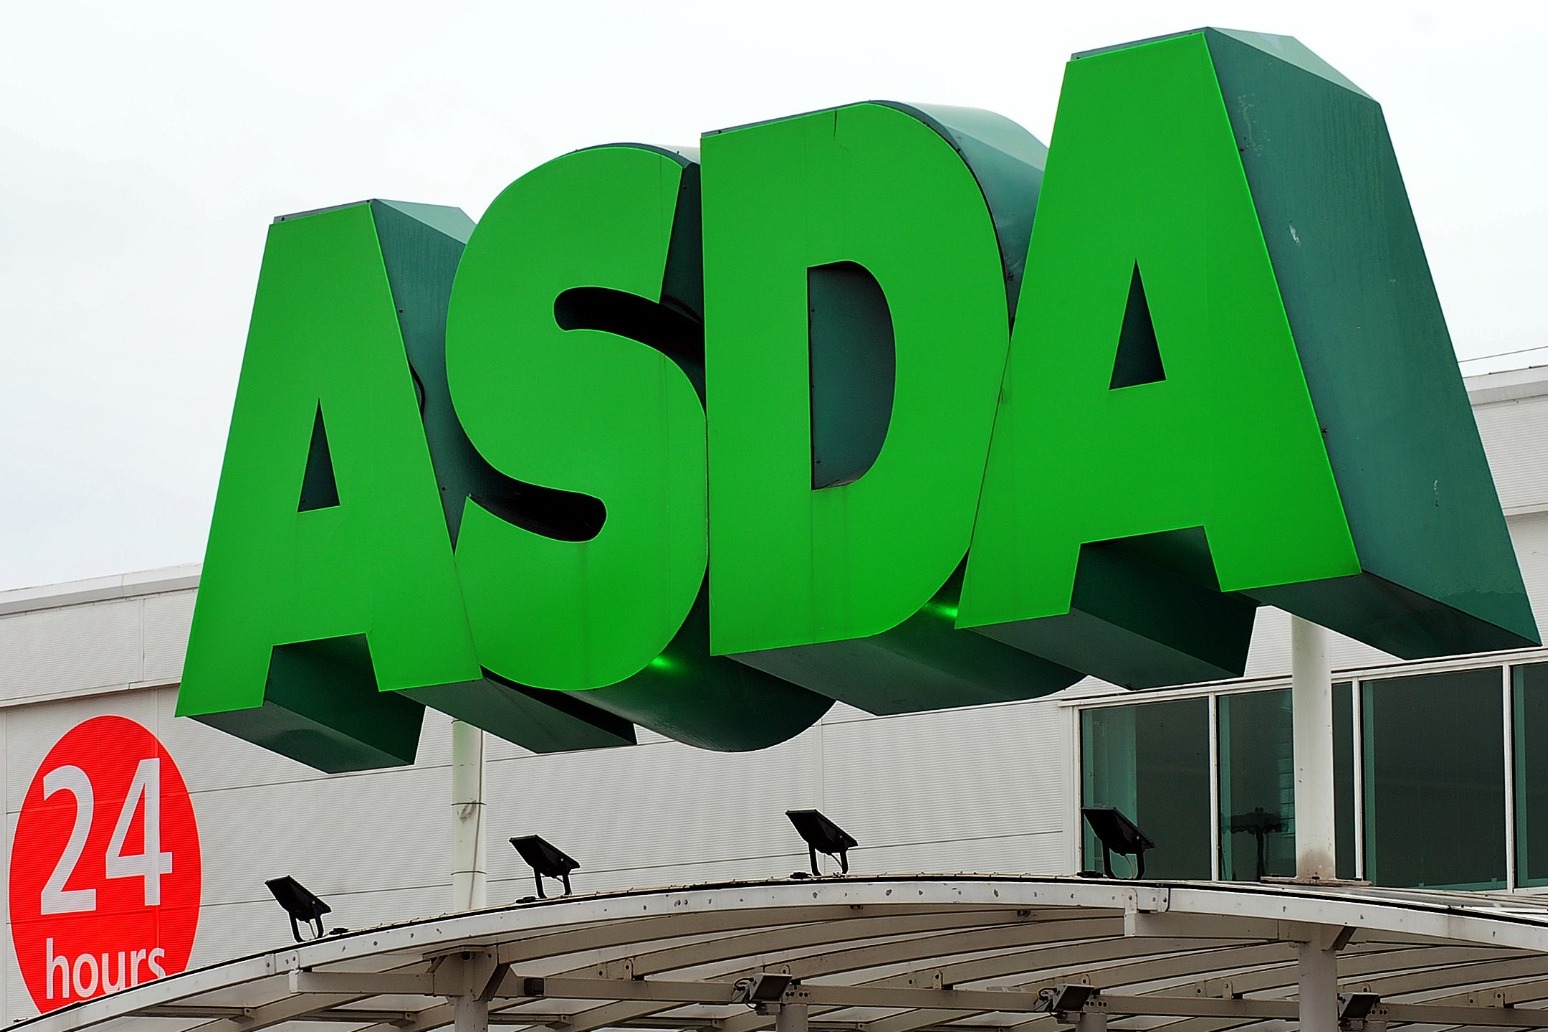 Thousands of jobs impacted as Asda launches major restructuring 